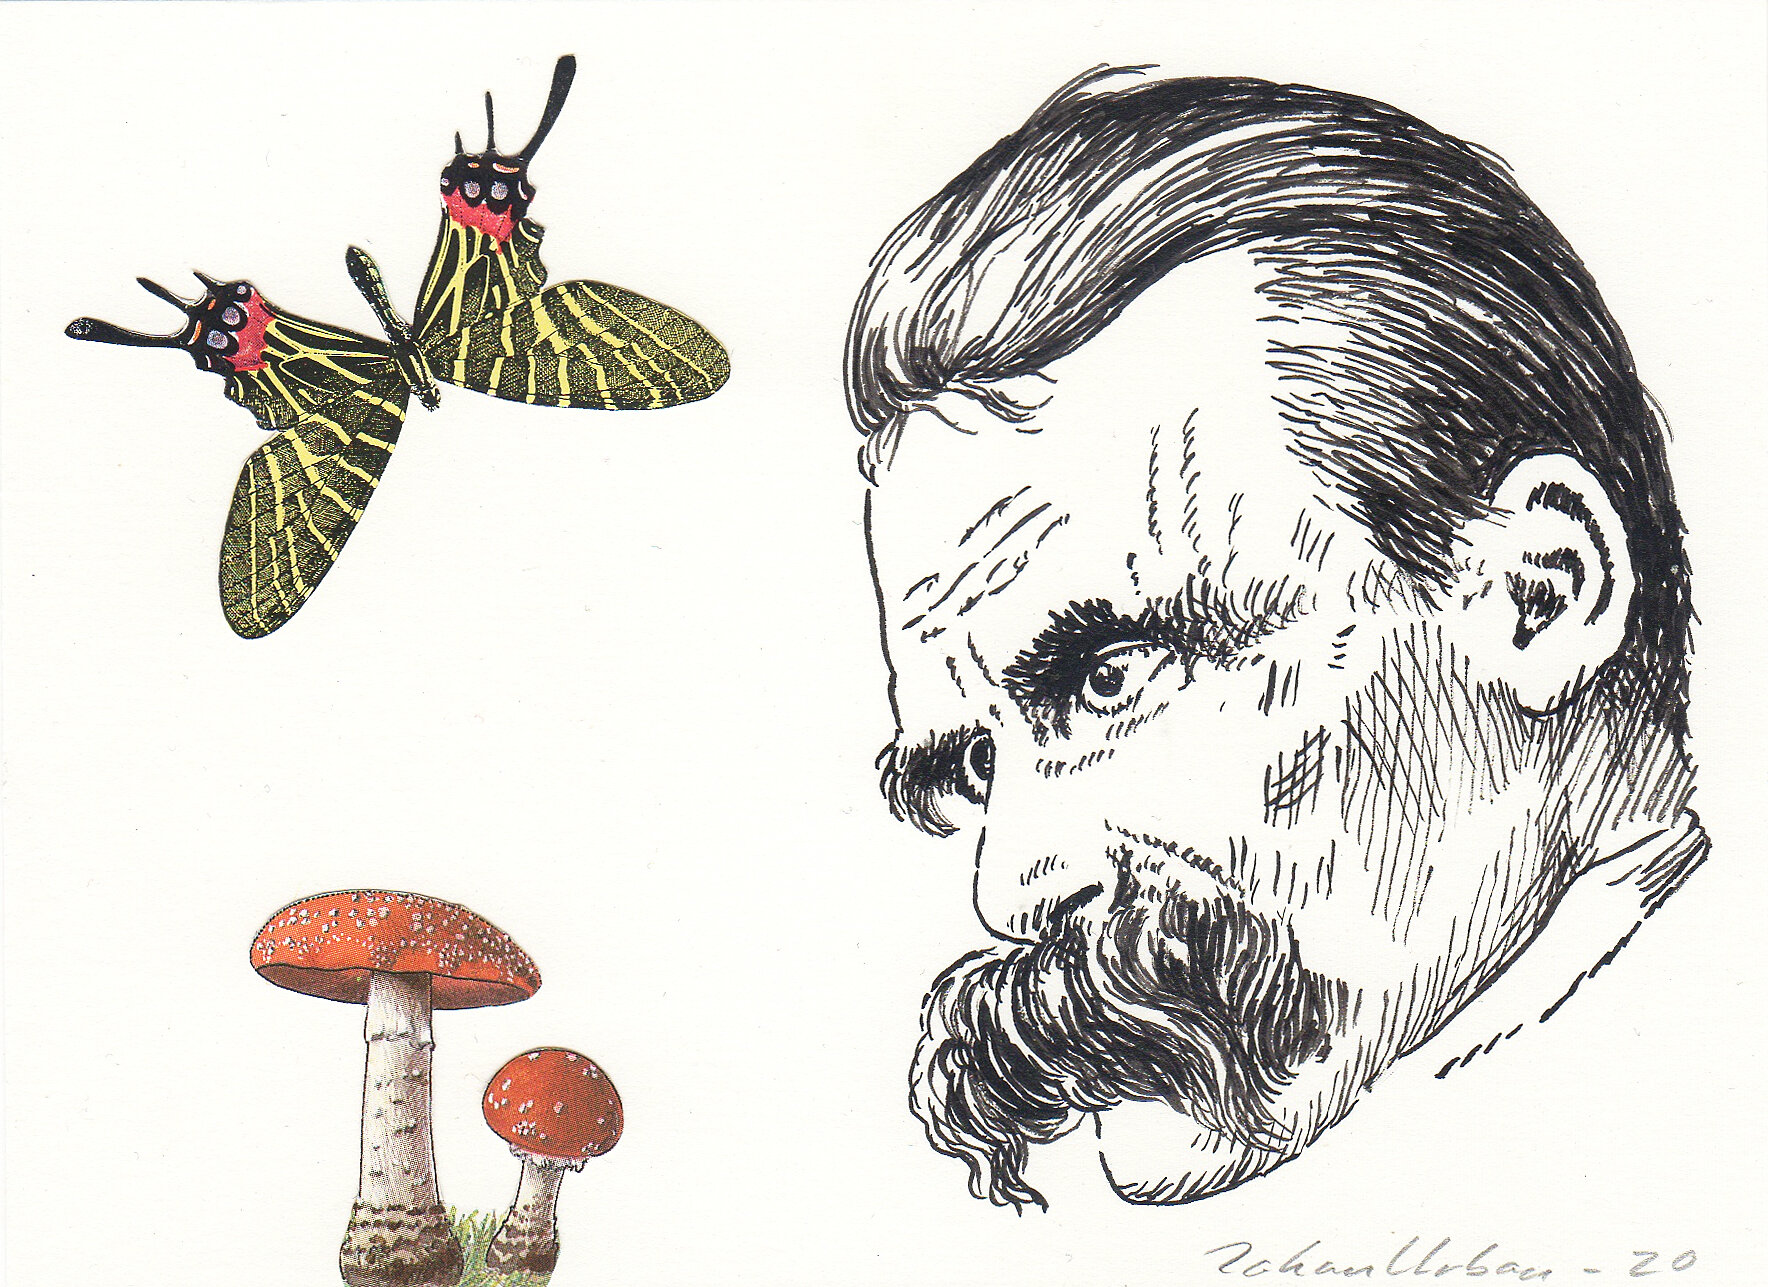 The Philosopher and the Amanita